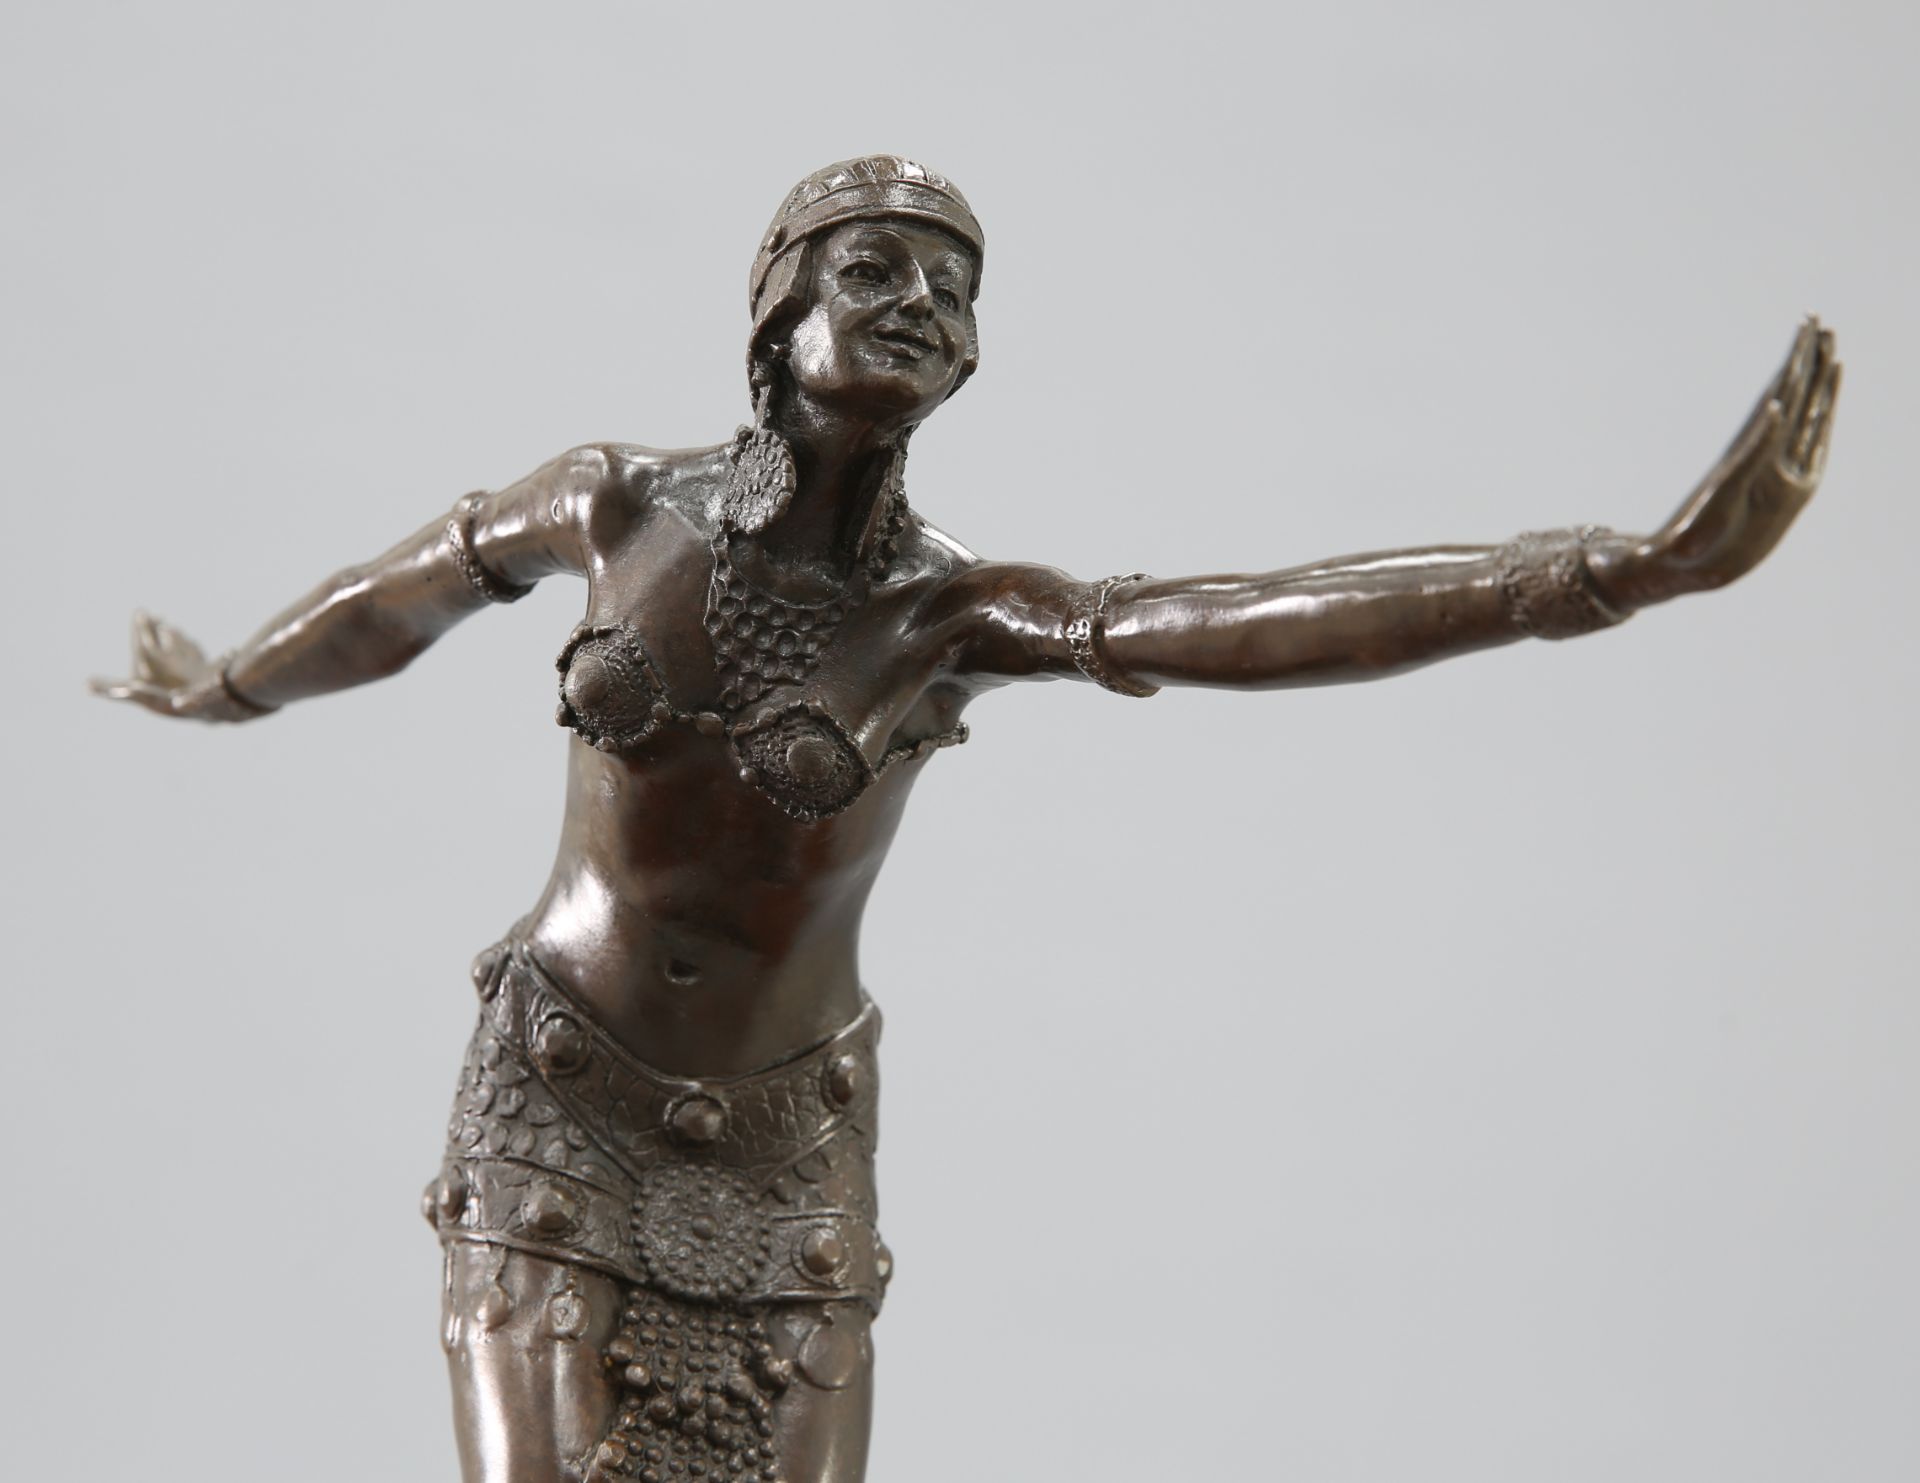 AN ART DECO STYLE BRONZE FIGURE OF A DANCER - Image 2 of 2